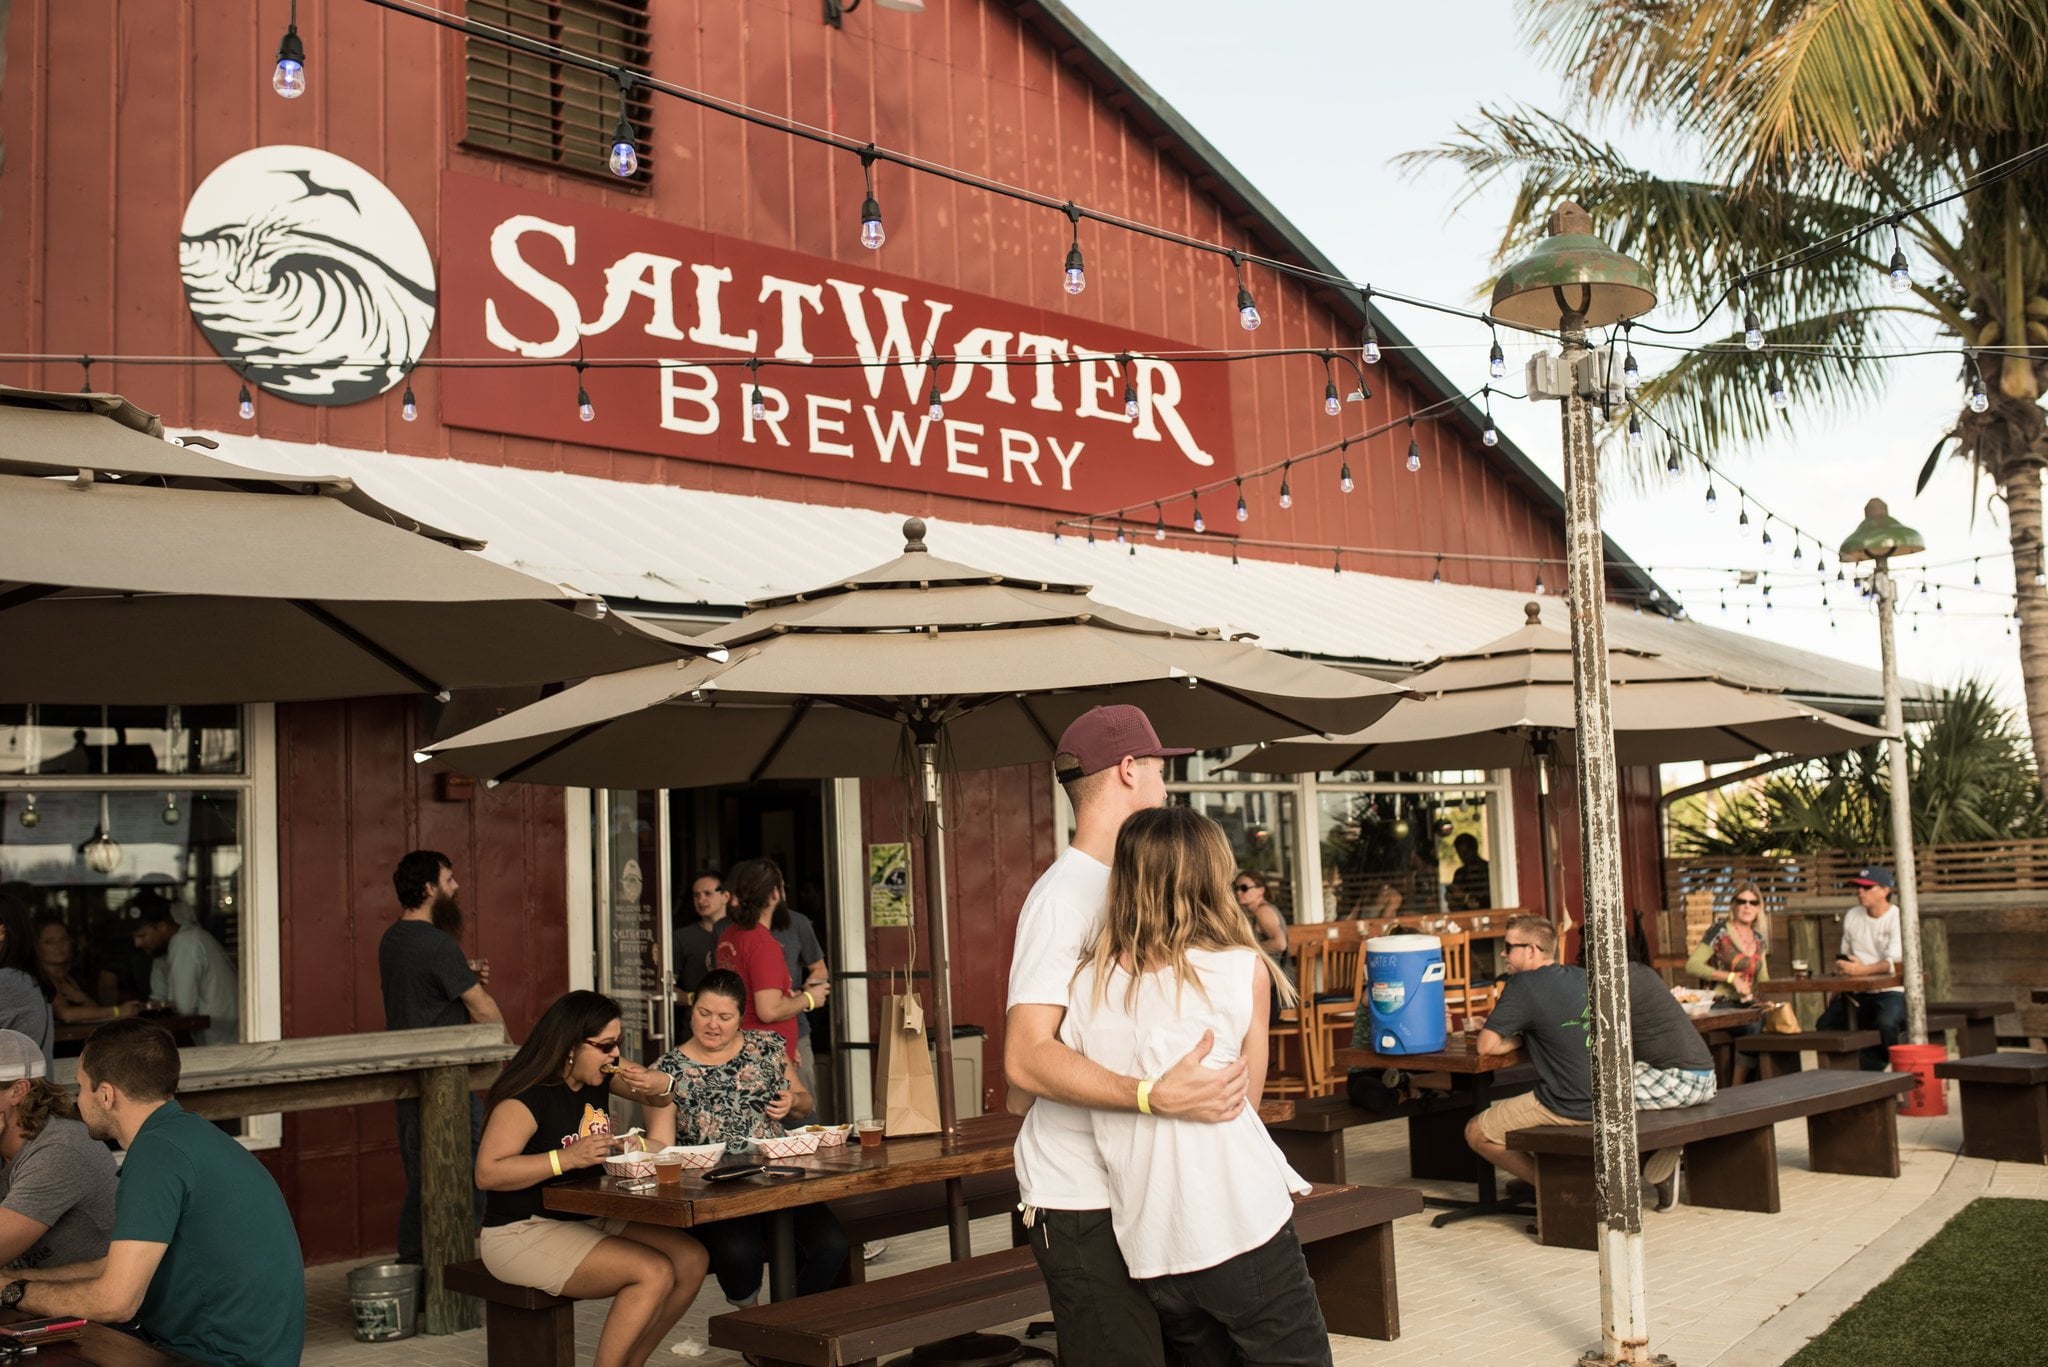 What's Brewing at Saltwater Brewery - July 18th